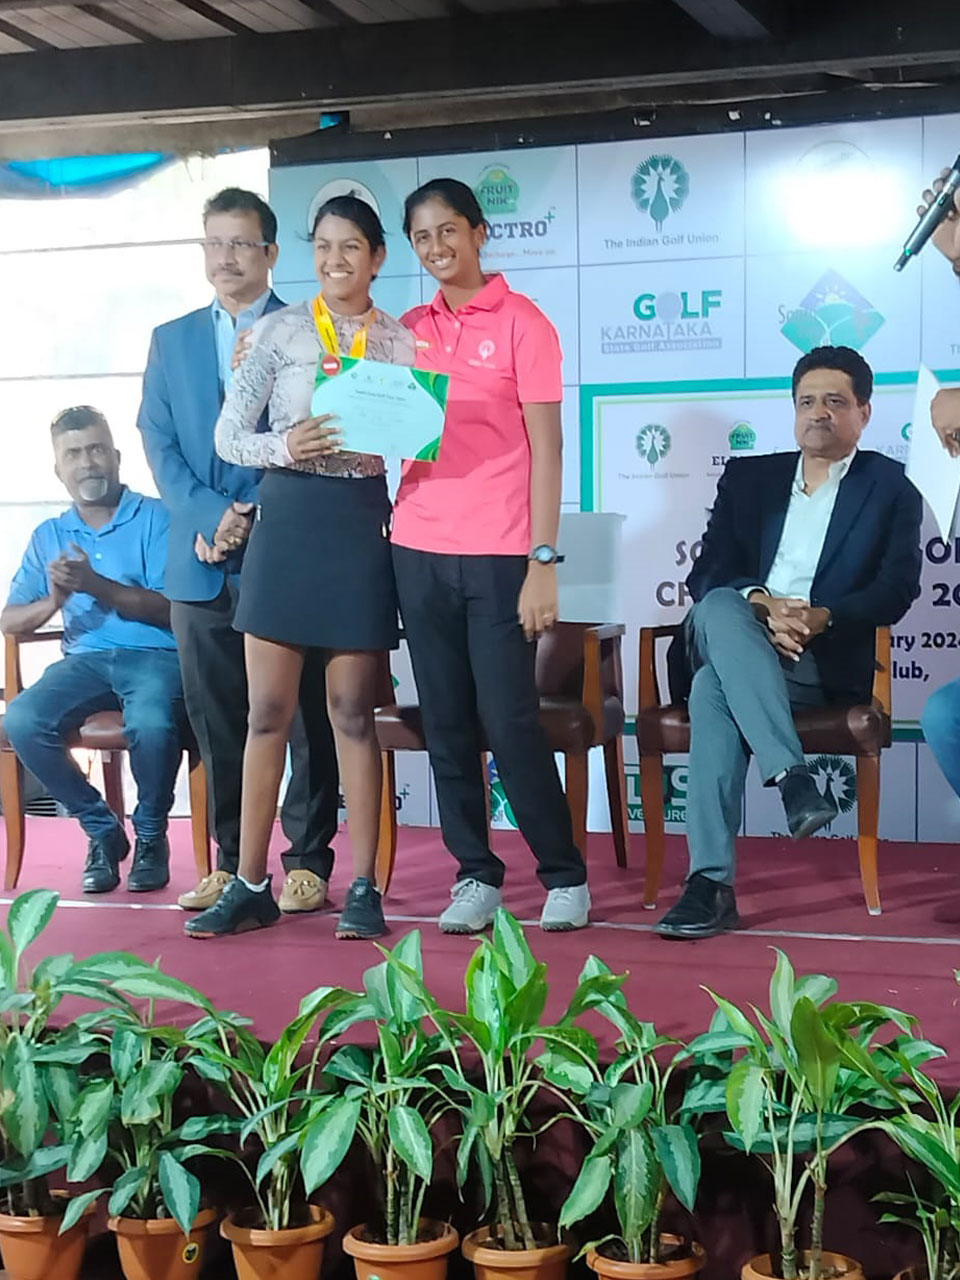 Dia Cris Kumar won the 'B' Girls category at the IGU South Zone Golf Championship held at Bangalore Golf Club with scores of 70 and 70.
